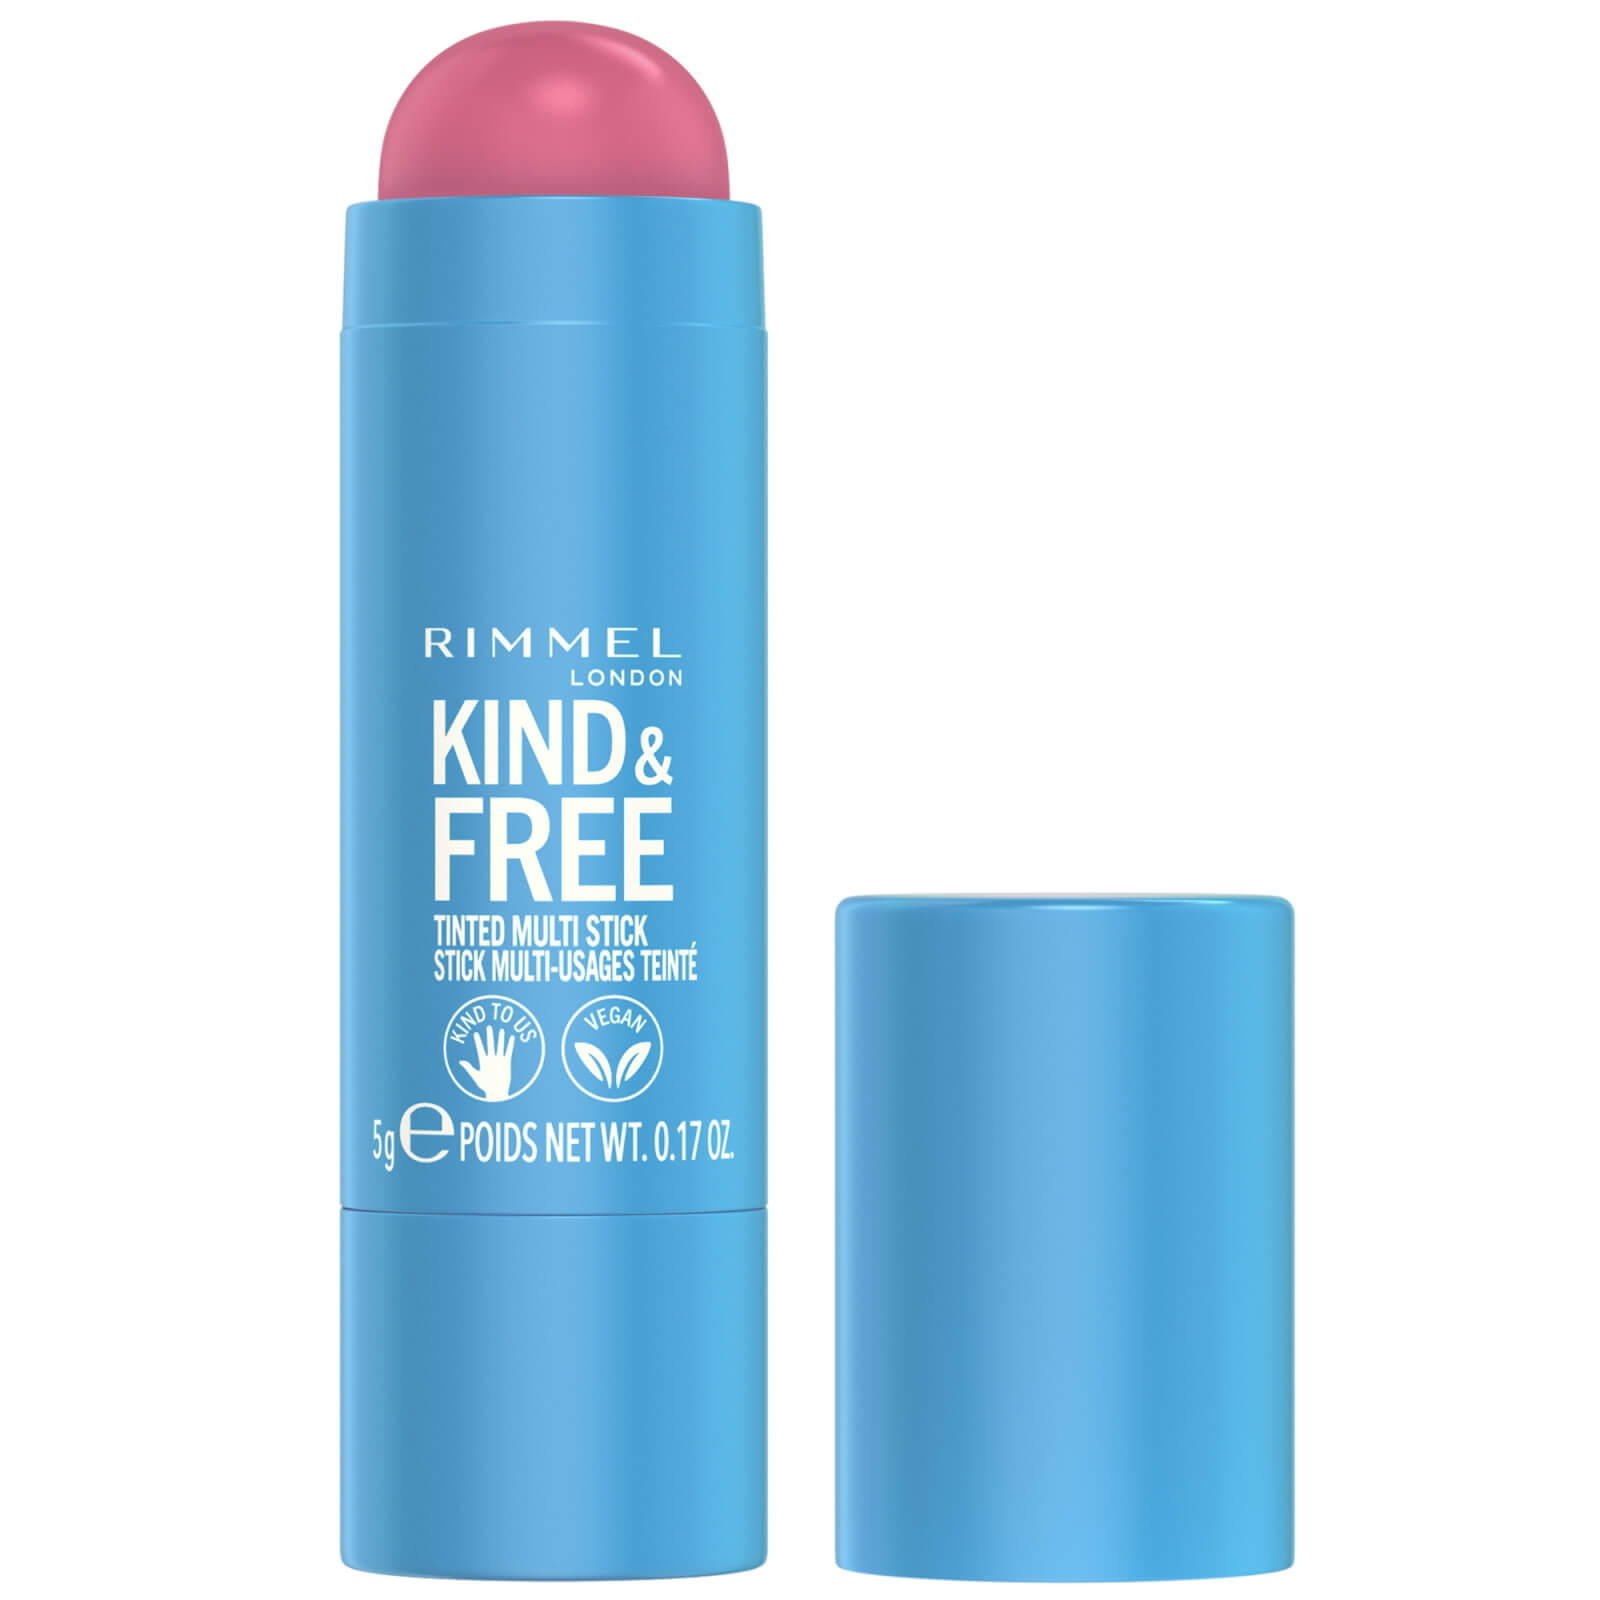 Image of Rimmel Kind and Free Multi-Stick 5ml (Various Shades) - 003 Pink Heat